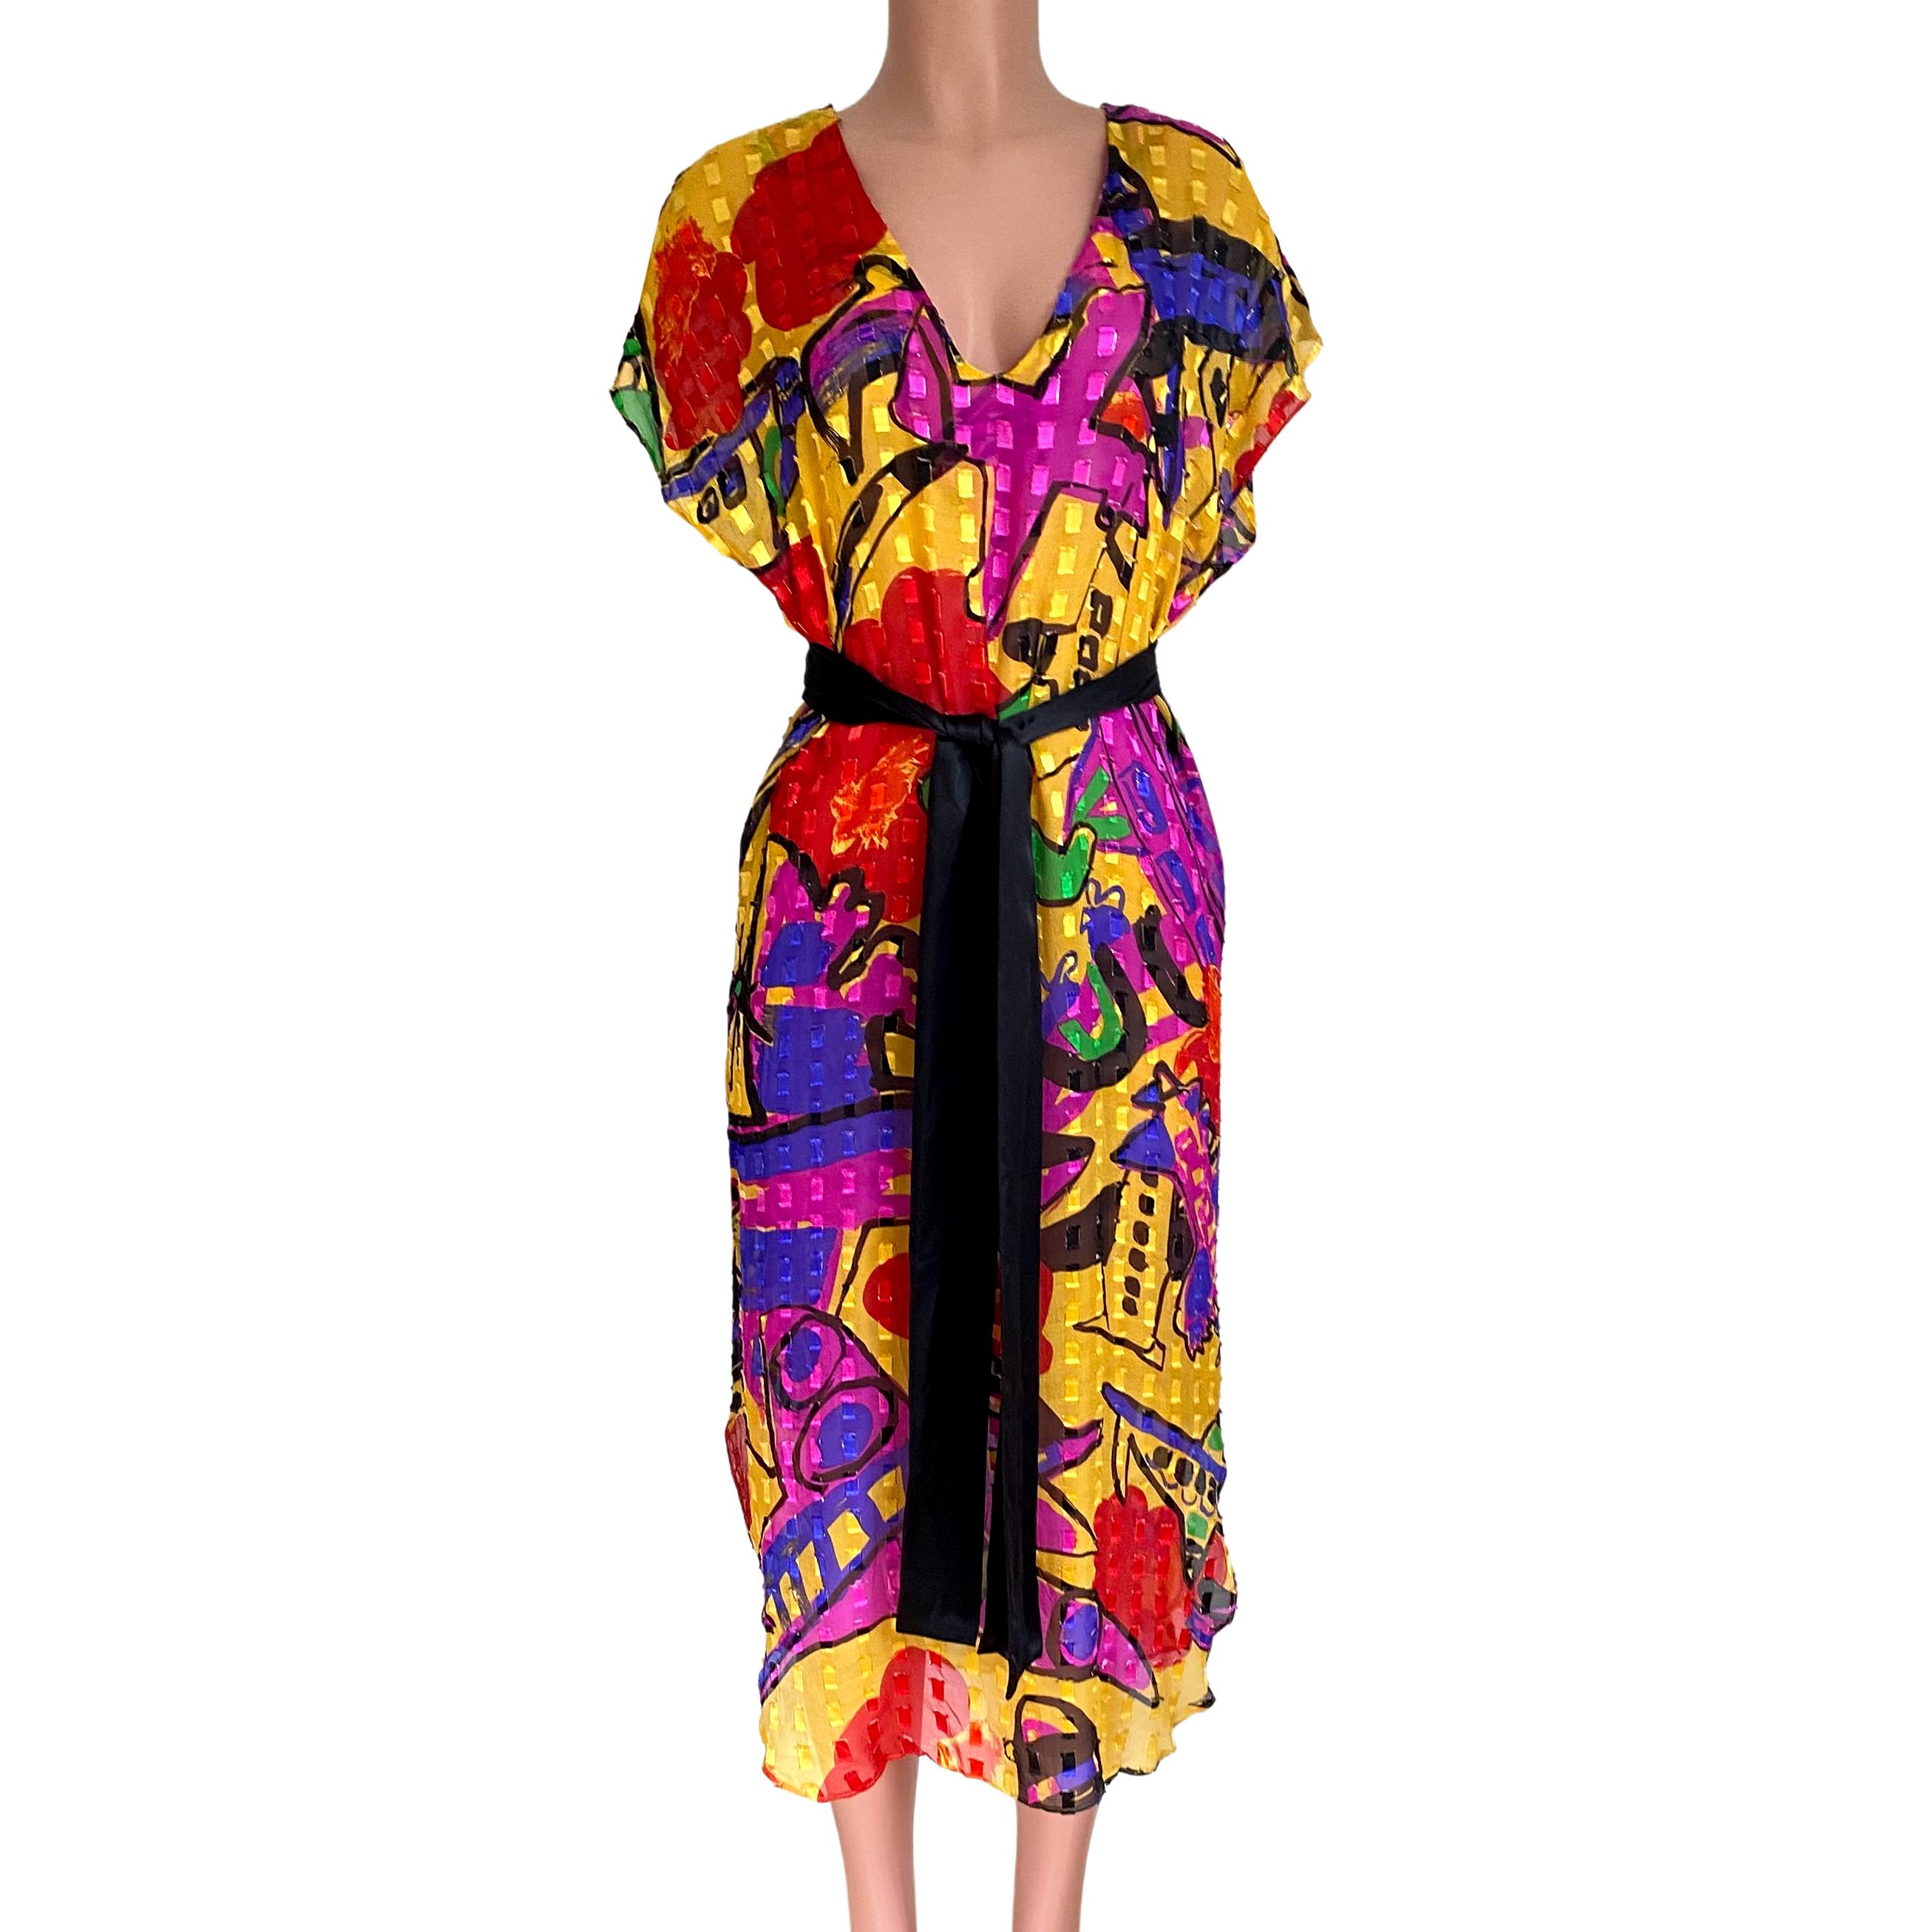 Easy cool silk ribbon-sheer dress in Flora's modern pop art print 
Dress only. Sash is a part of the black furisode kimono which is listed separately.
Size reads S but it's a S/M. Approximately 48